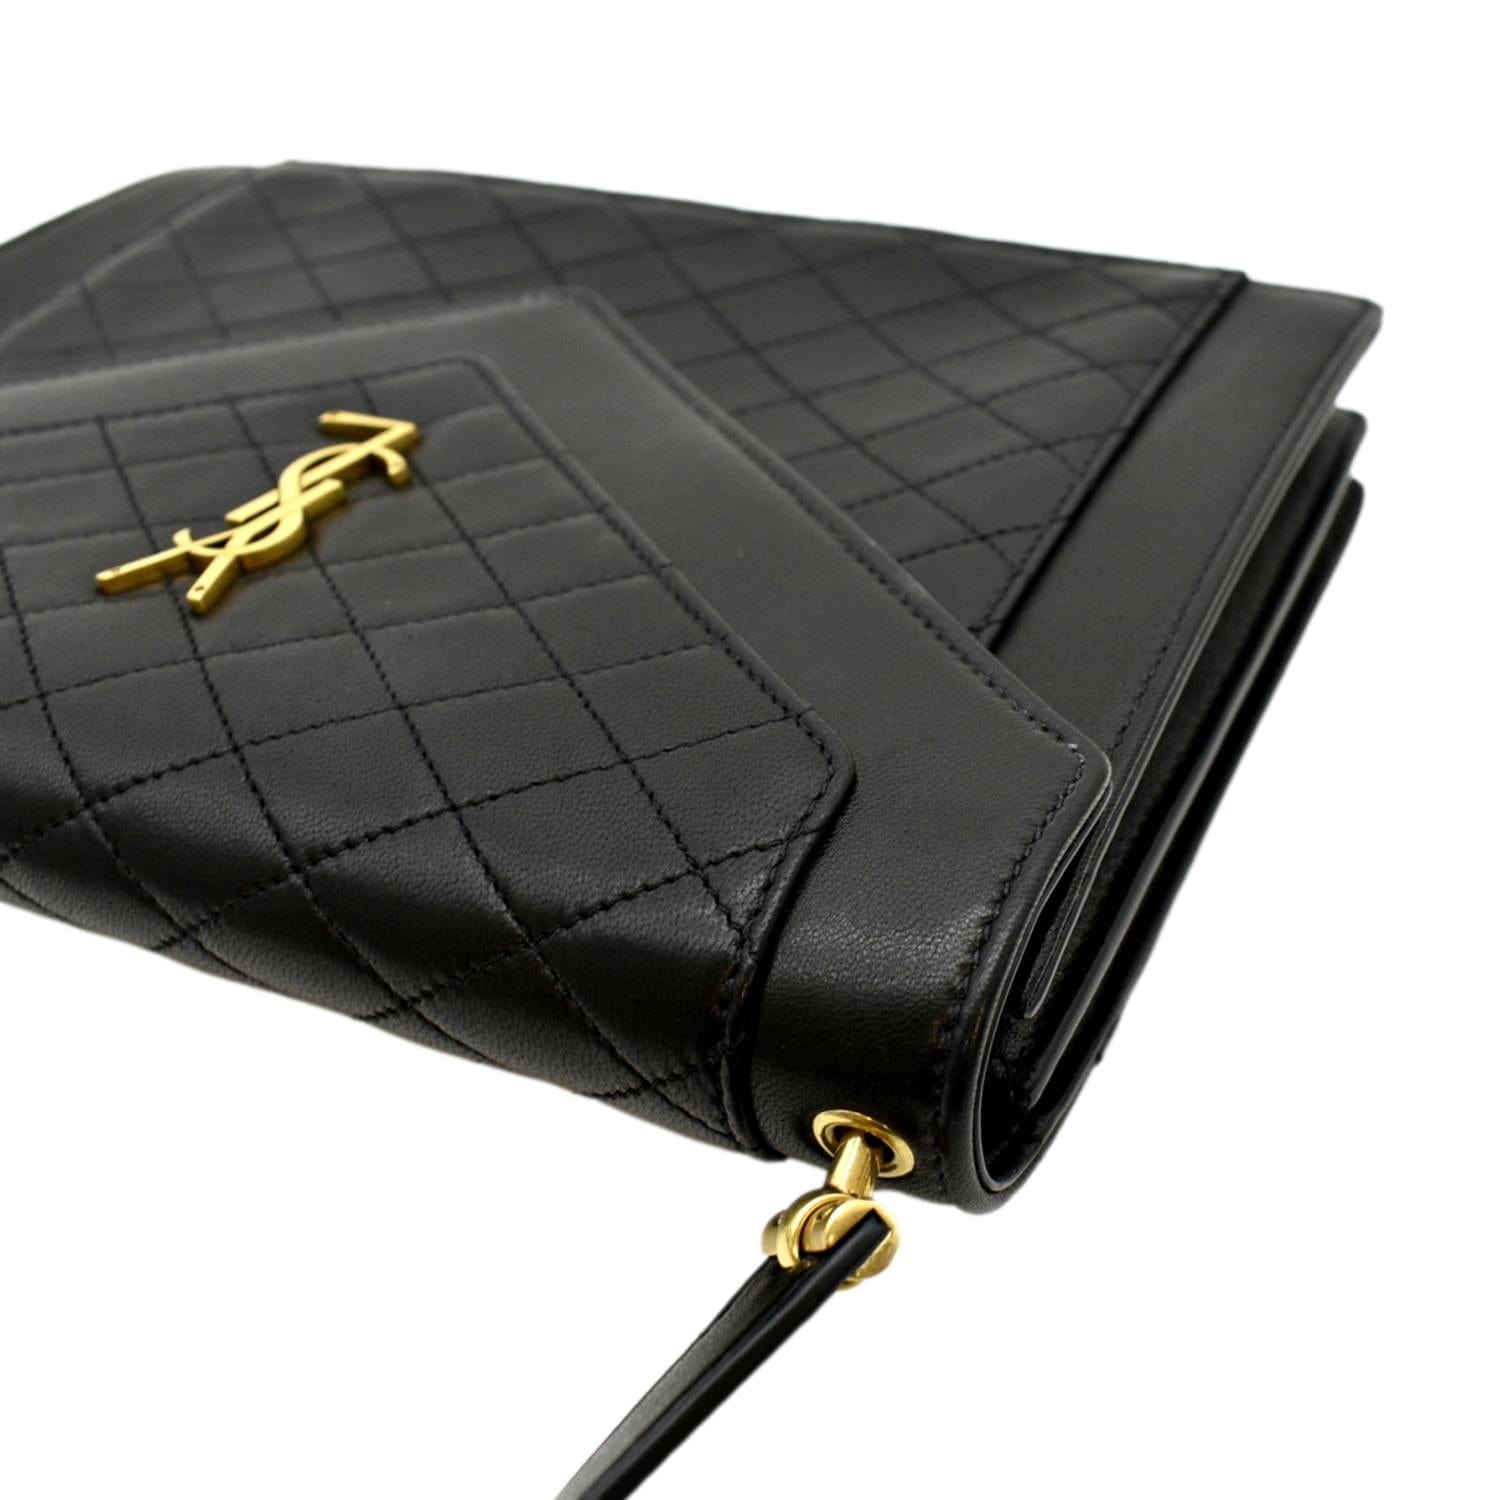 Gaby Small Leather Clutch in Black - Saint Laurent